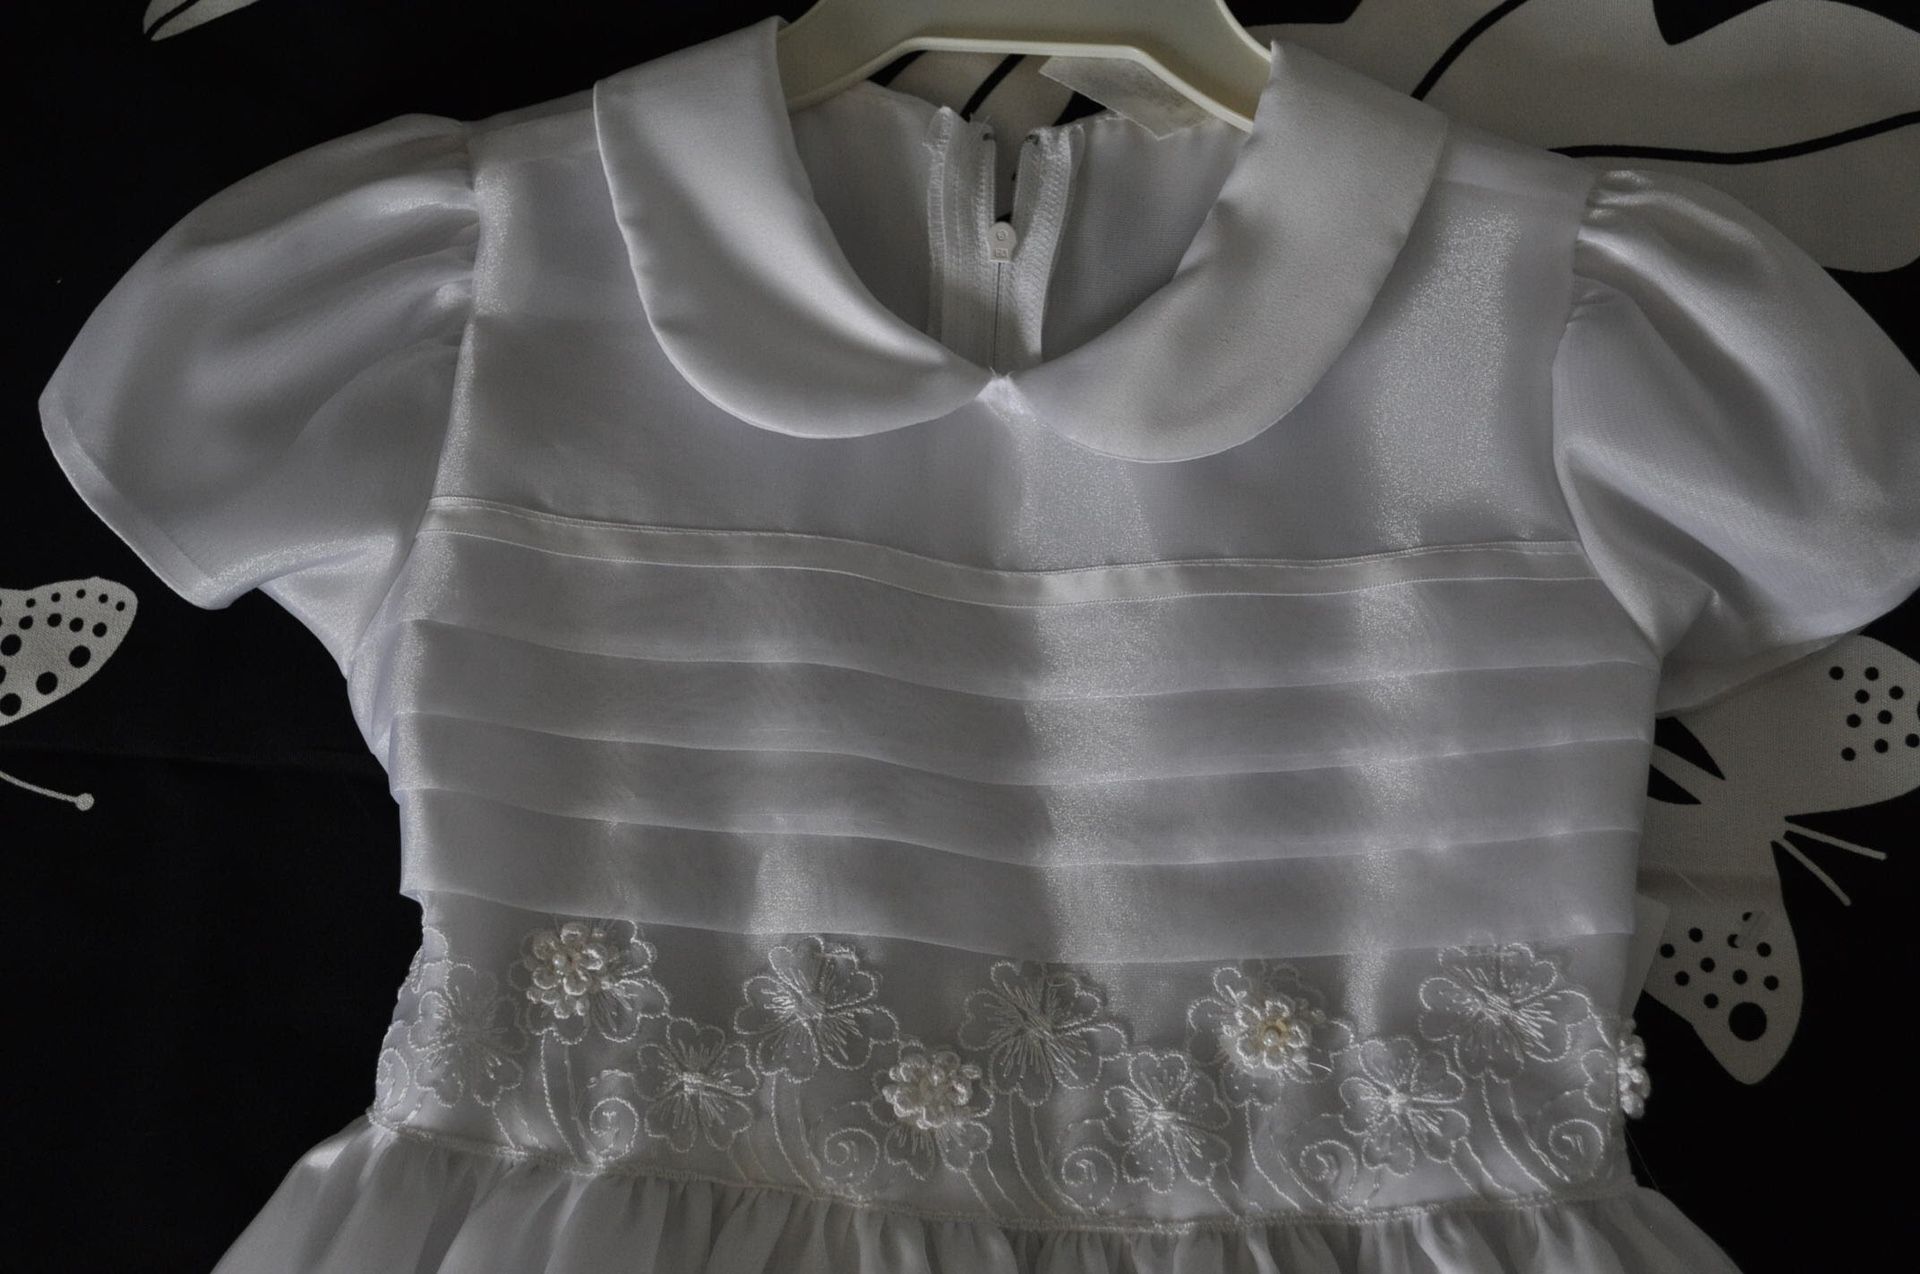 First Communion dresses, Flower And Baptism Dresses 